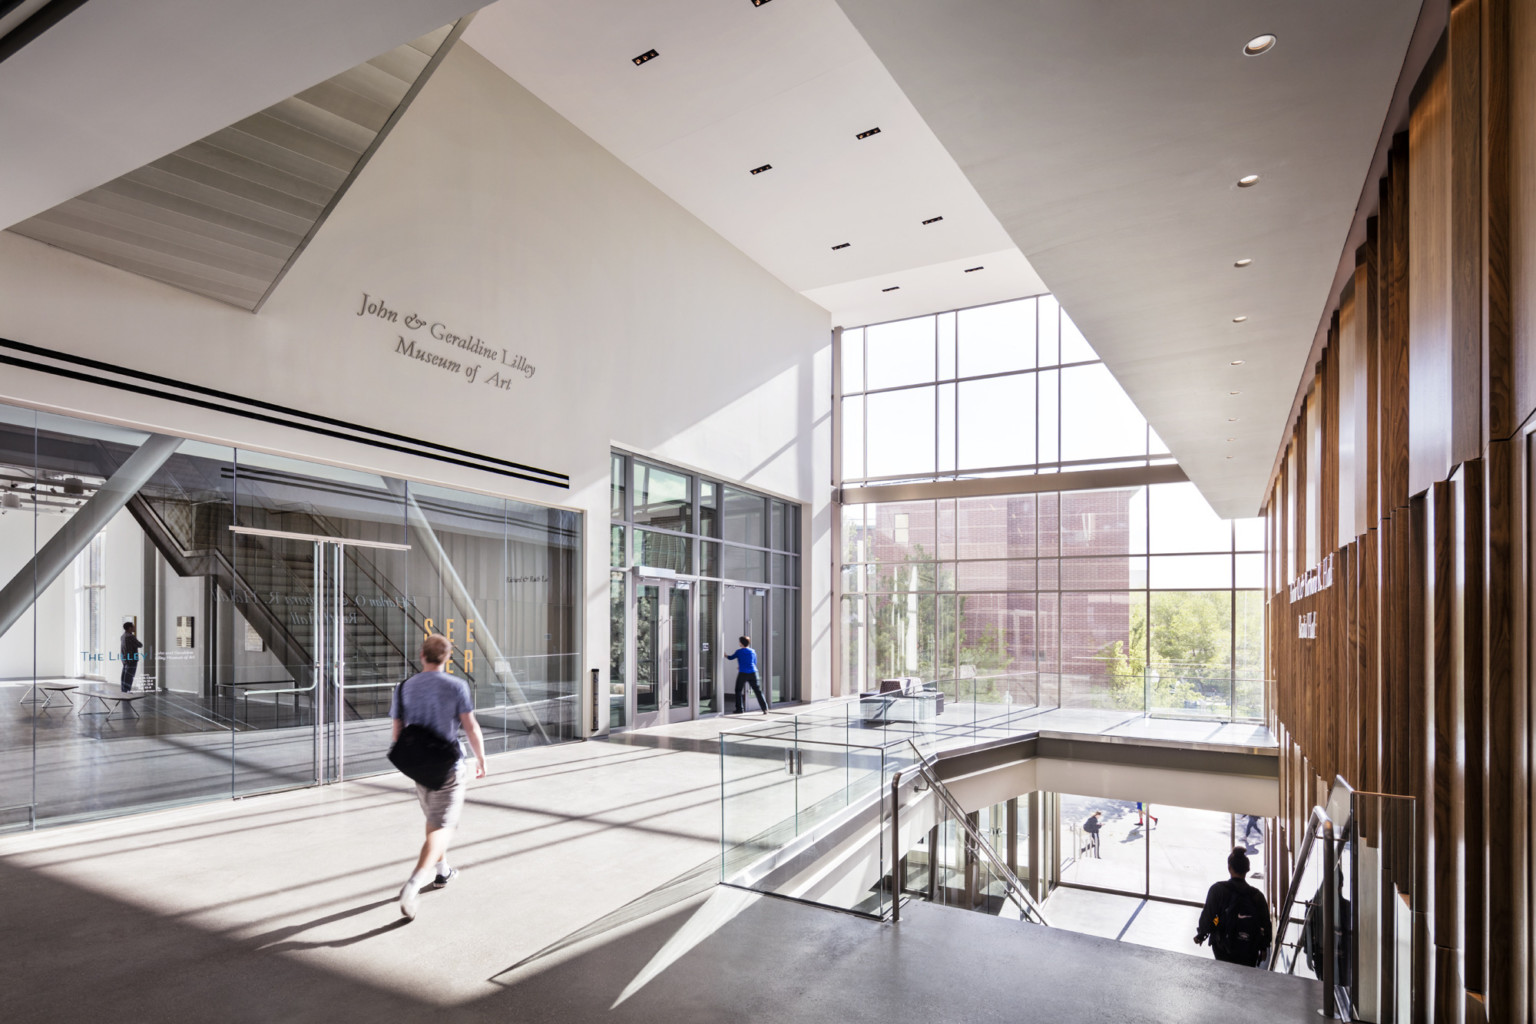 students walk through multistory lobby with angular ceiling